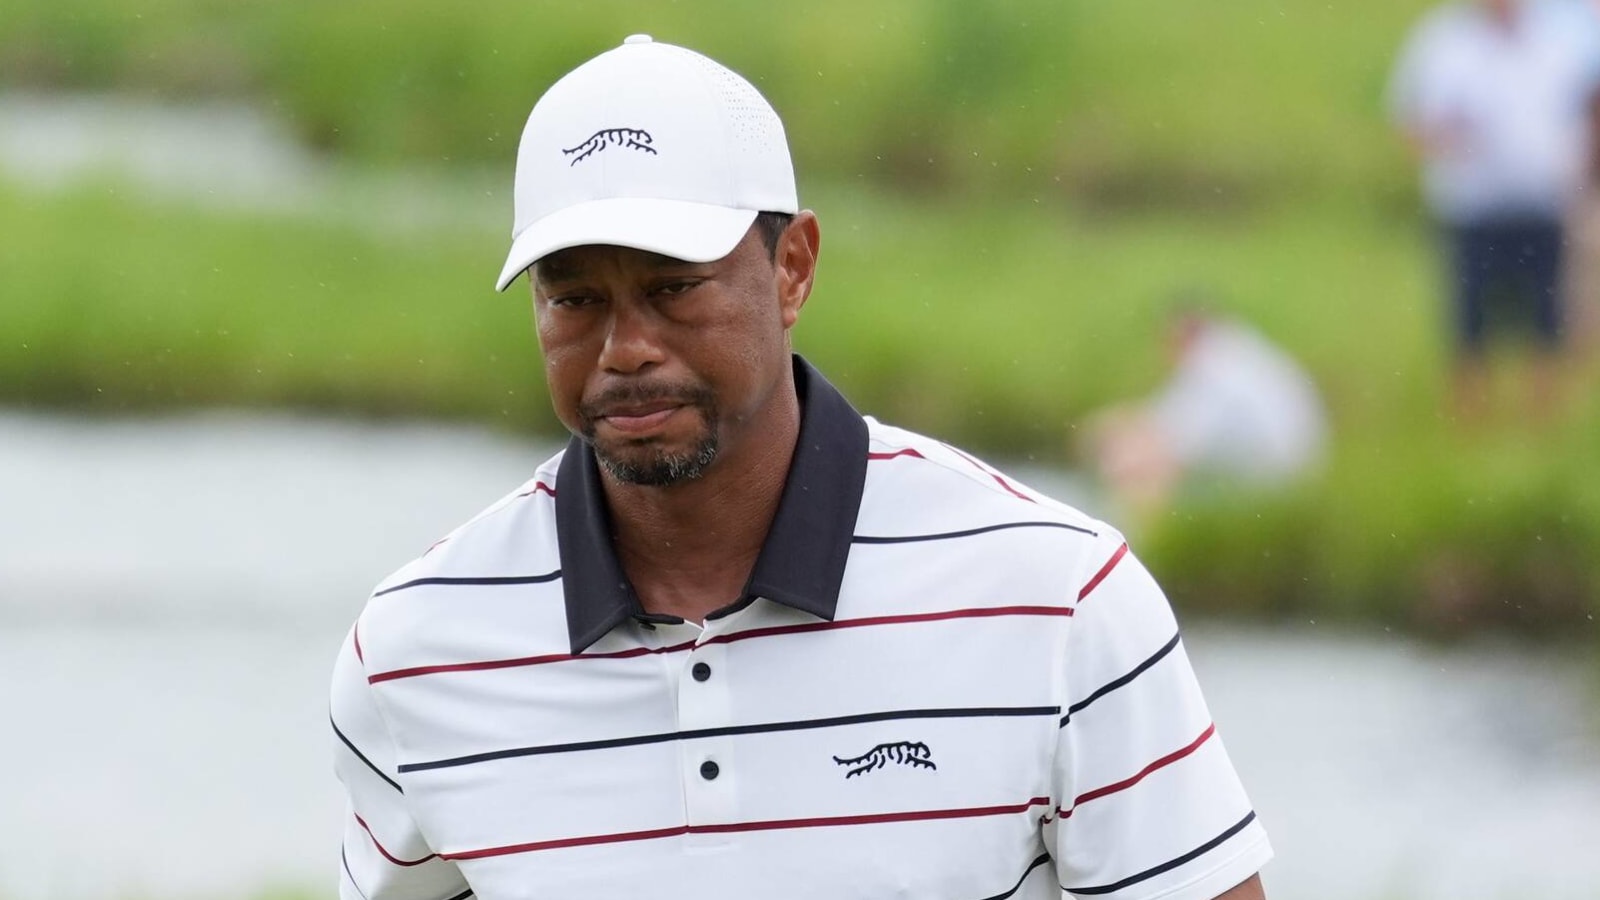 Tiger Woods blames one factor for missing cut at PGA Championship